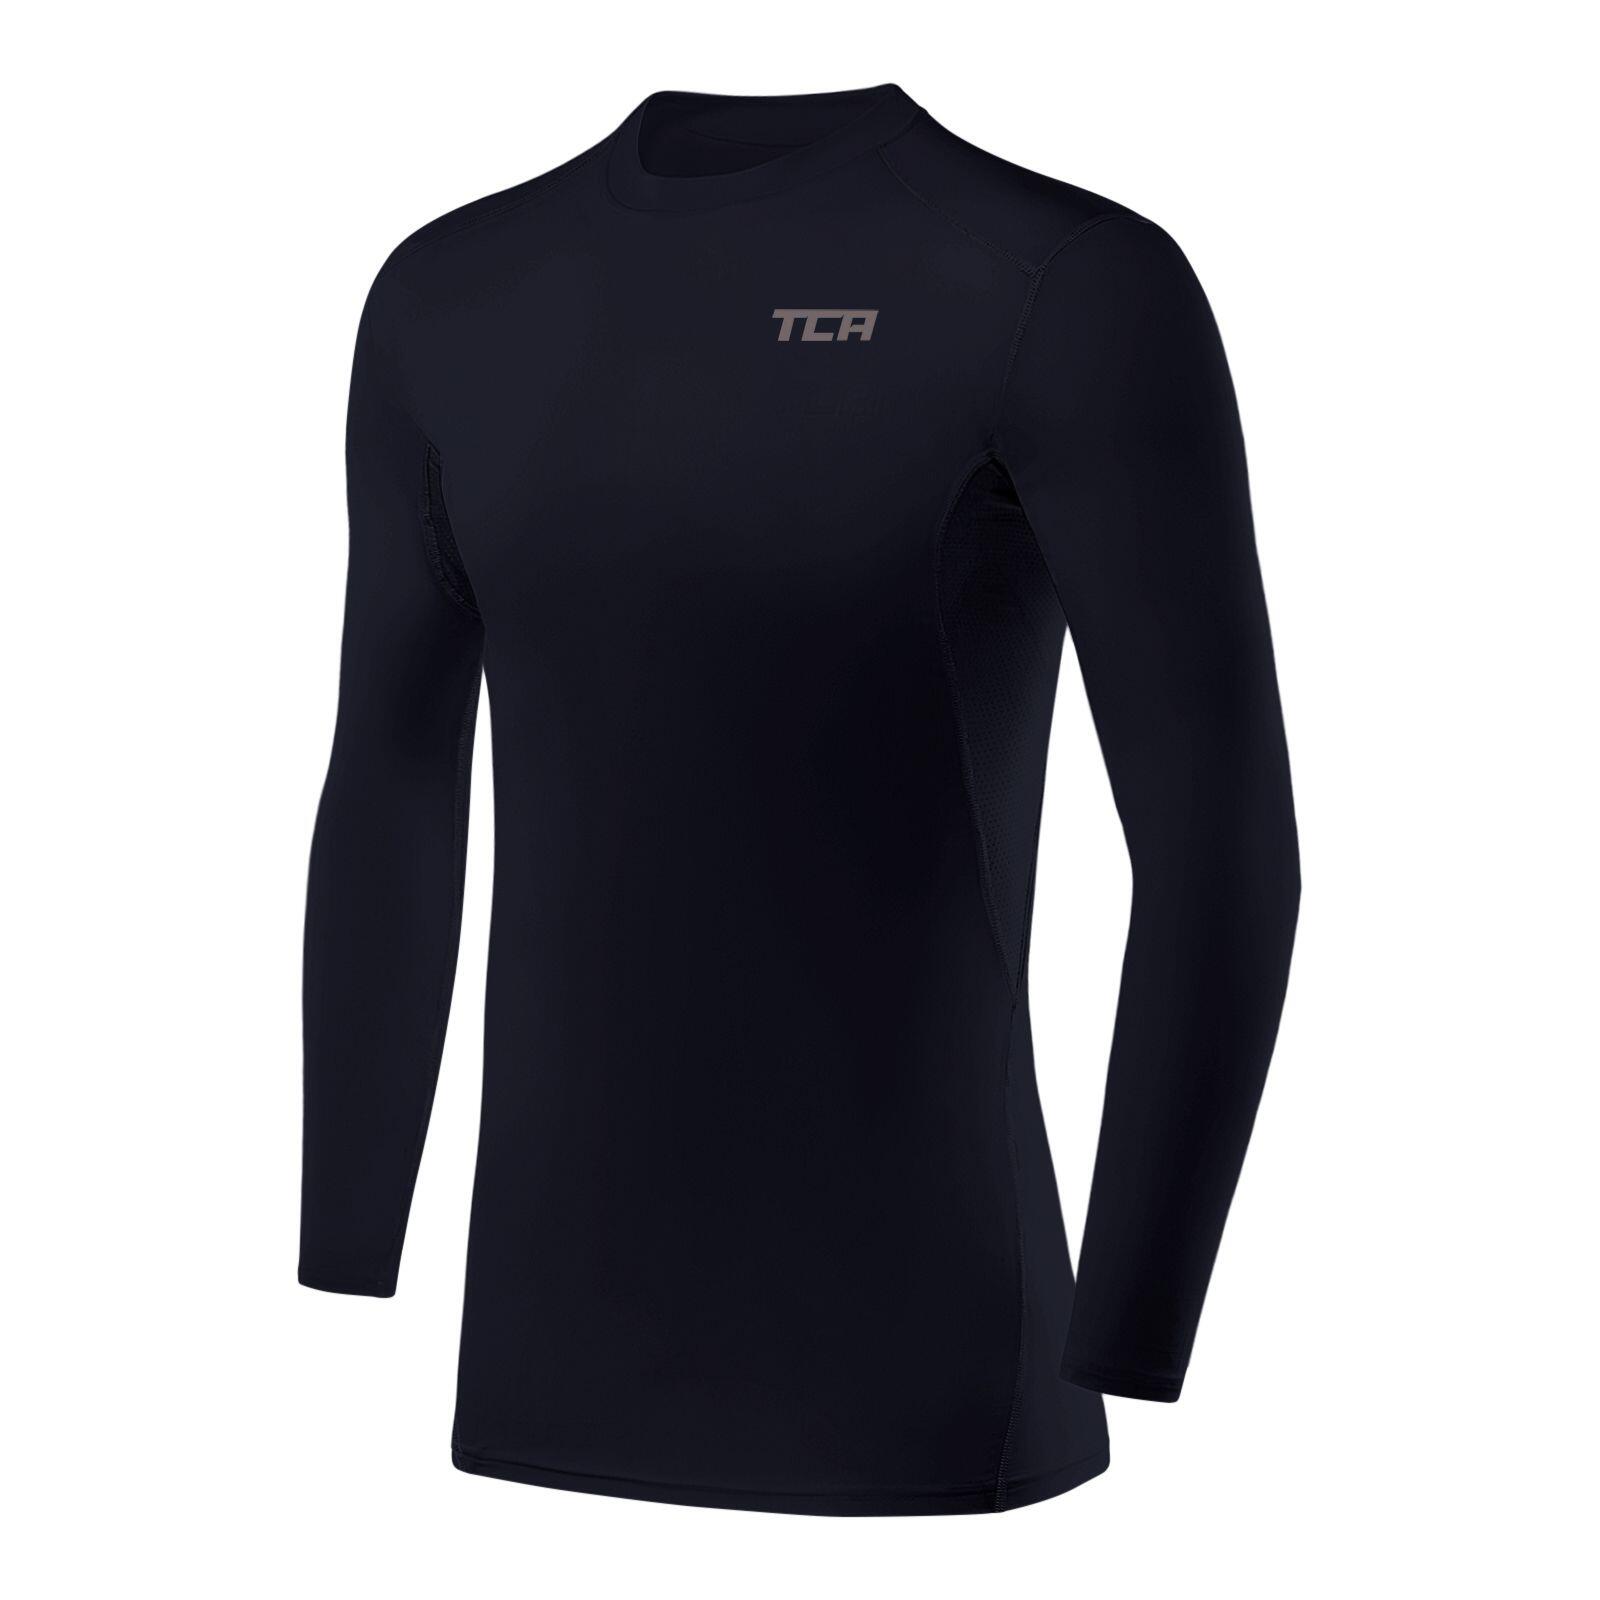 TCA Boys' HyperFusion Breathable Base Layer Compression Top - Navy Blazer